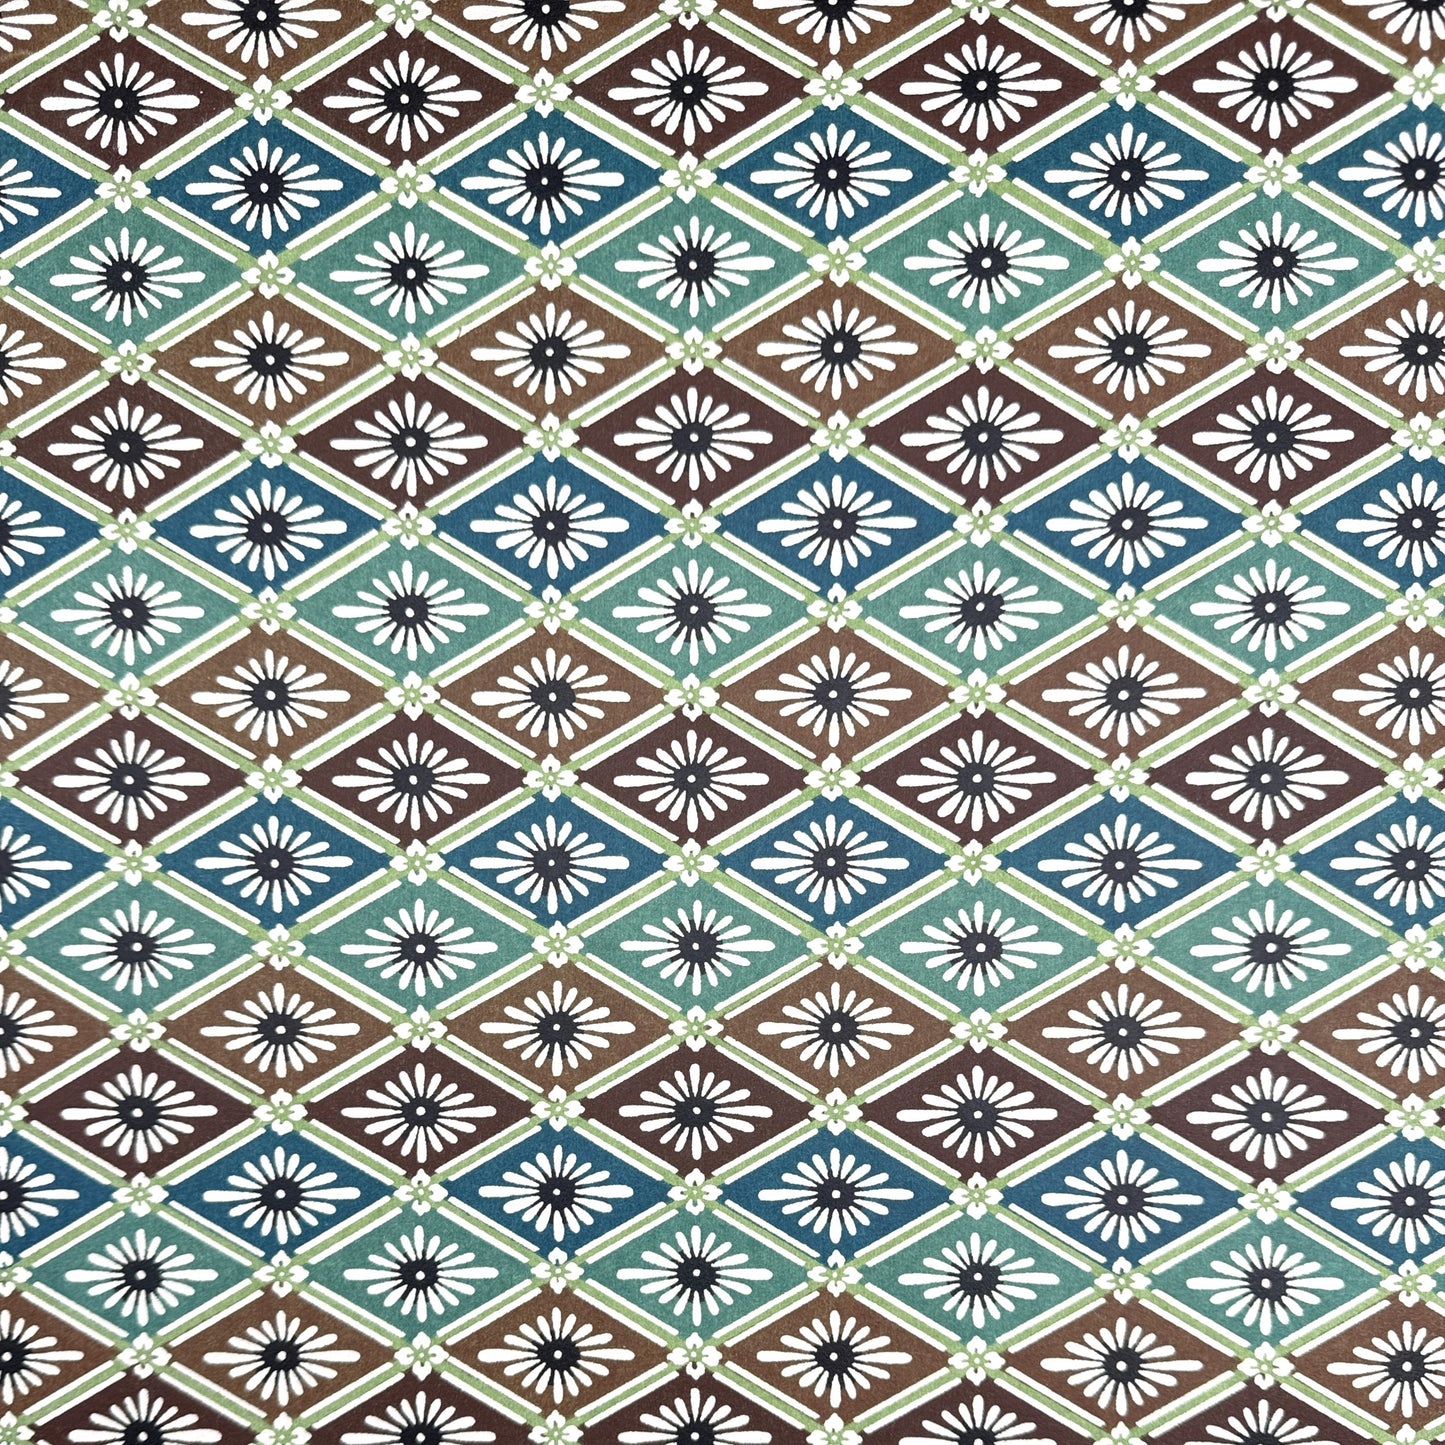 A Japanese stencil-dyed patterned paper with a repeat pattern of floral diamonds in tones of blue, aqua, brown and white.